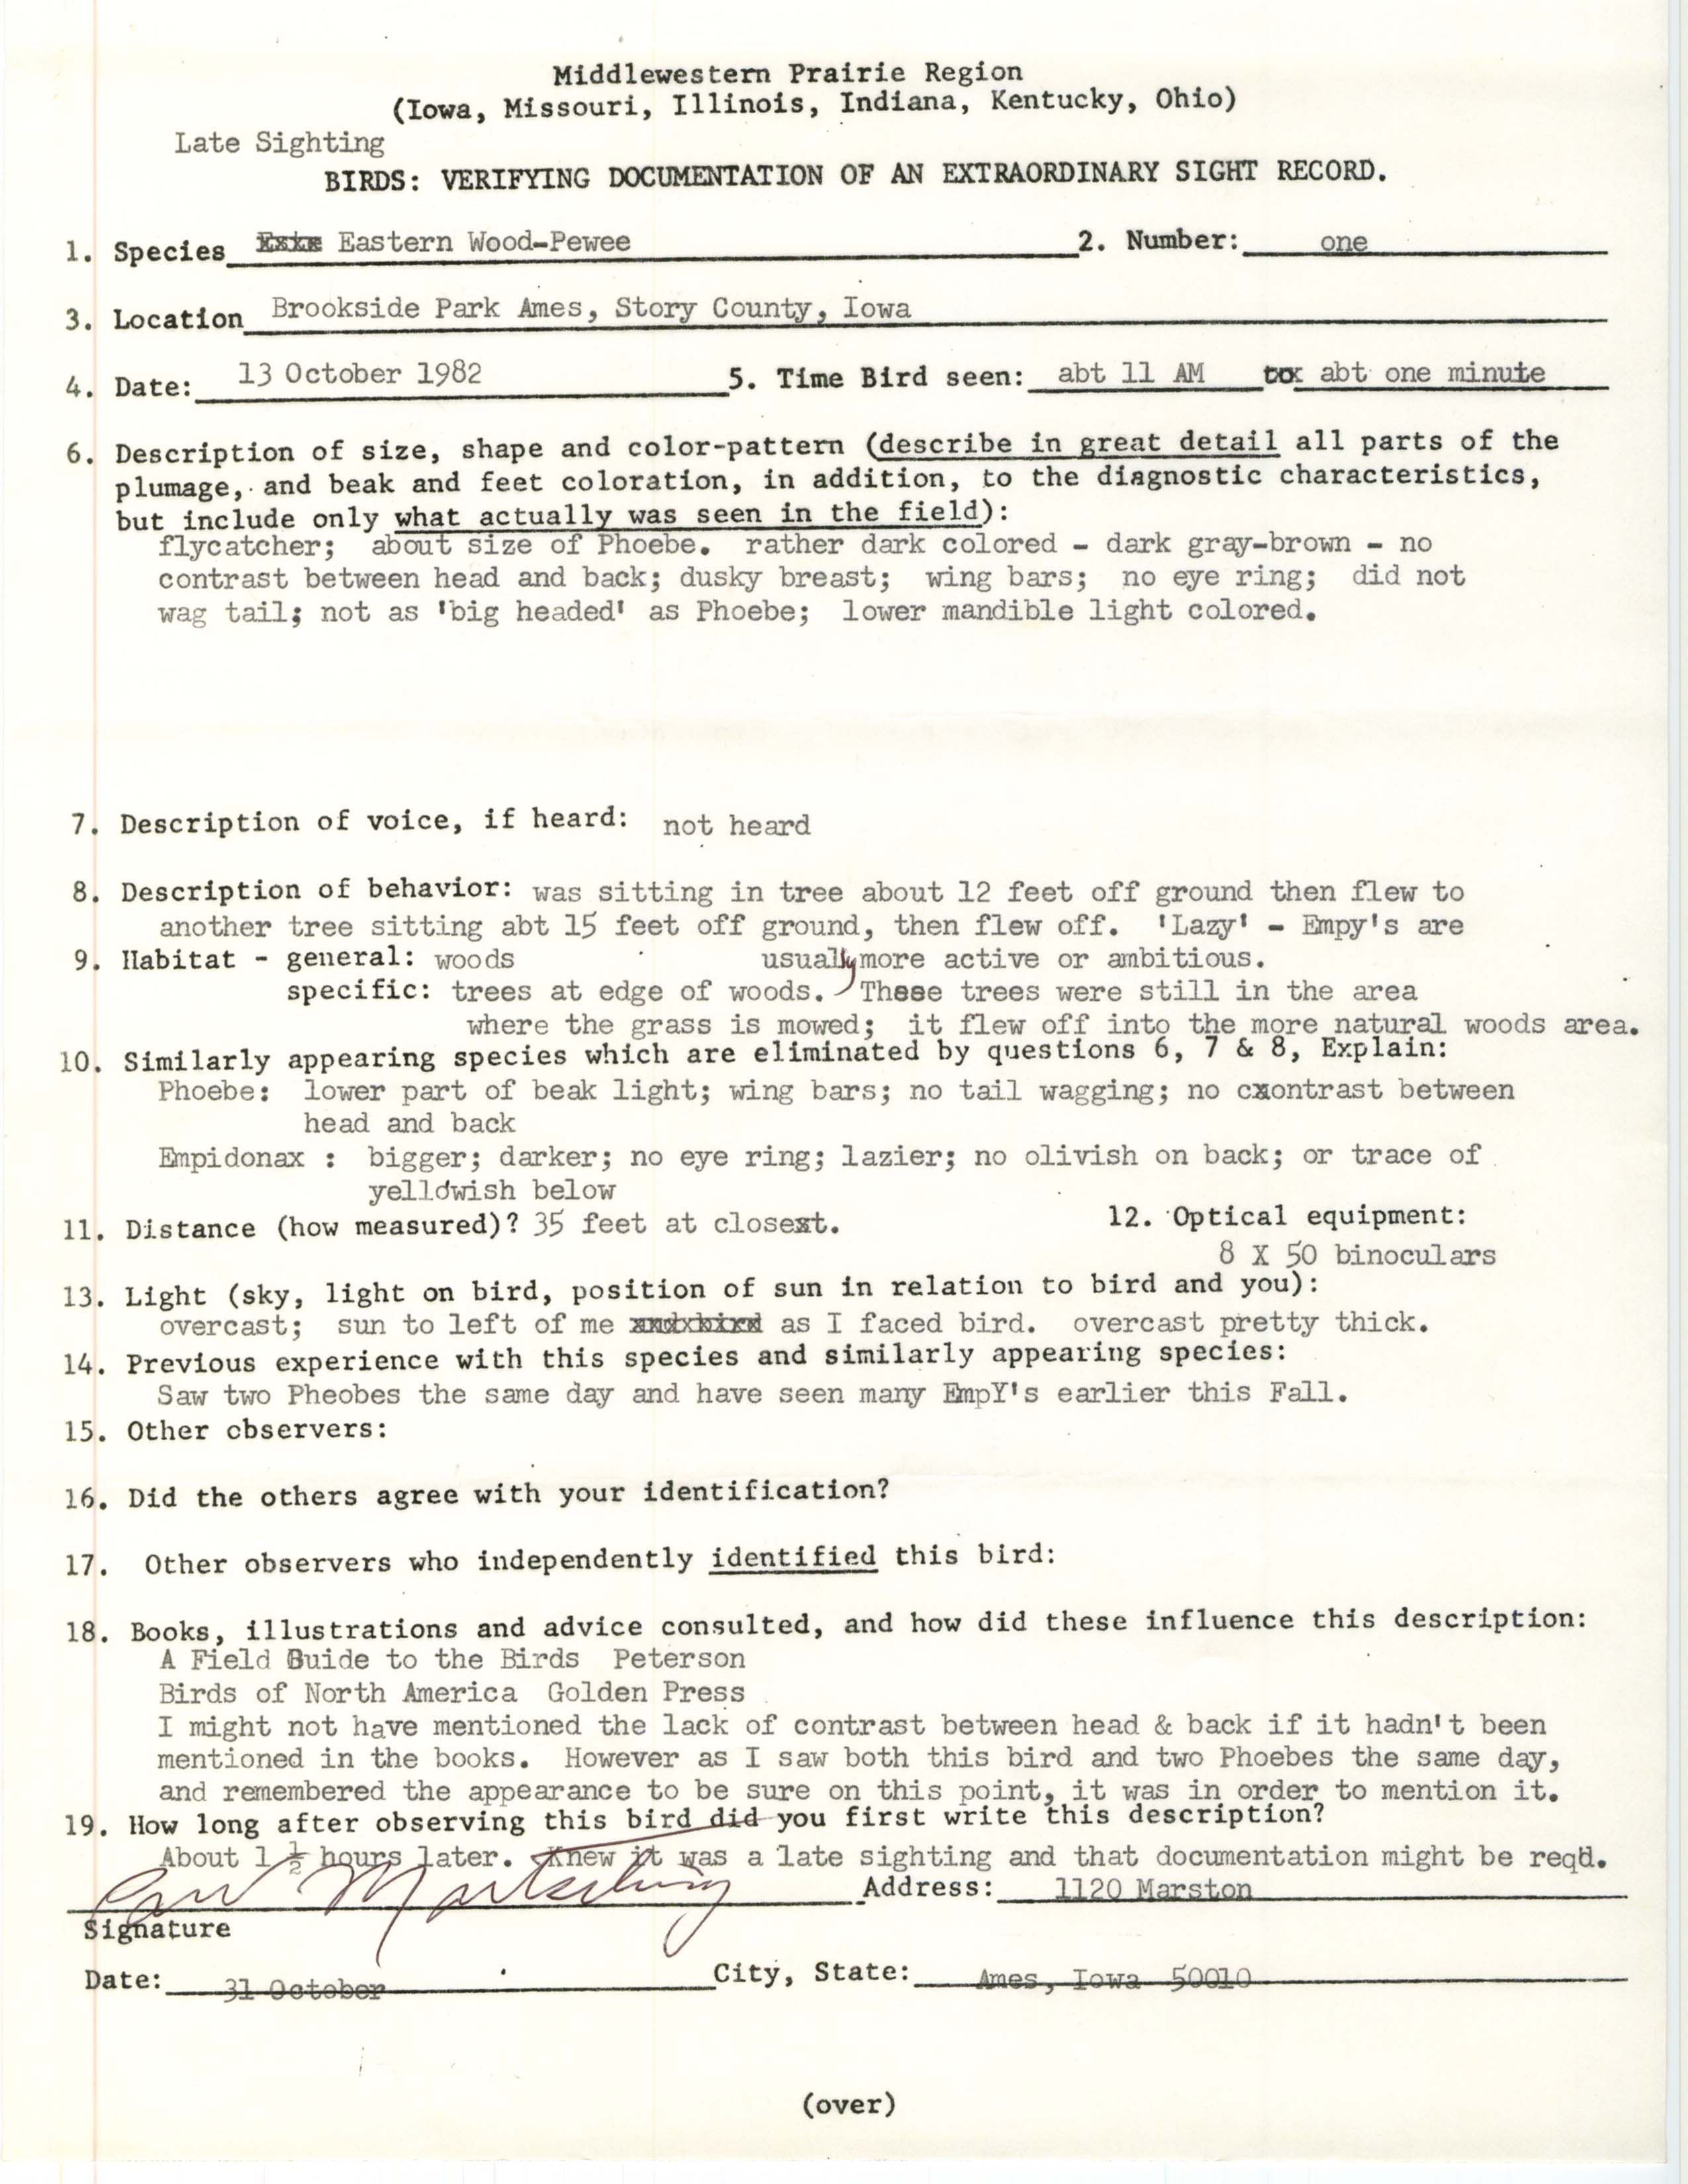 Rare bird documentation form for Eastern Wood-Pewee at Brookside Park in Ames, 1982